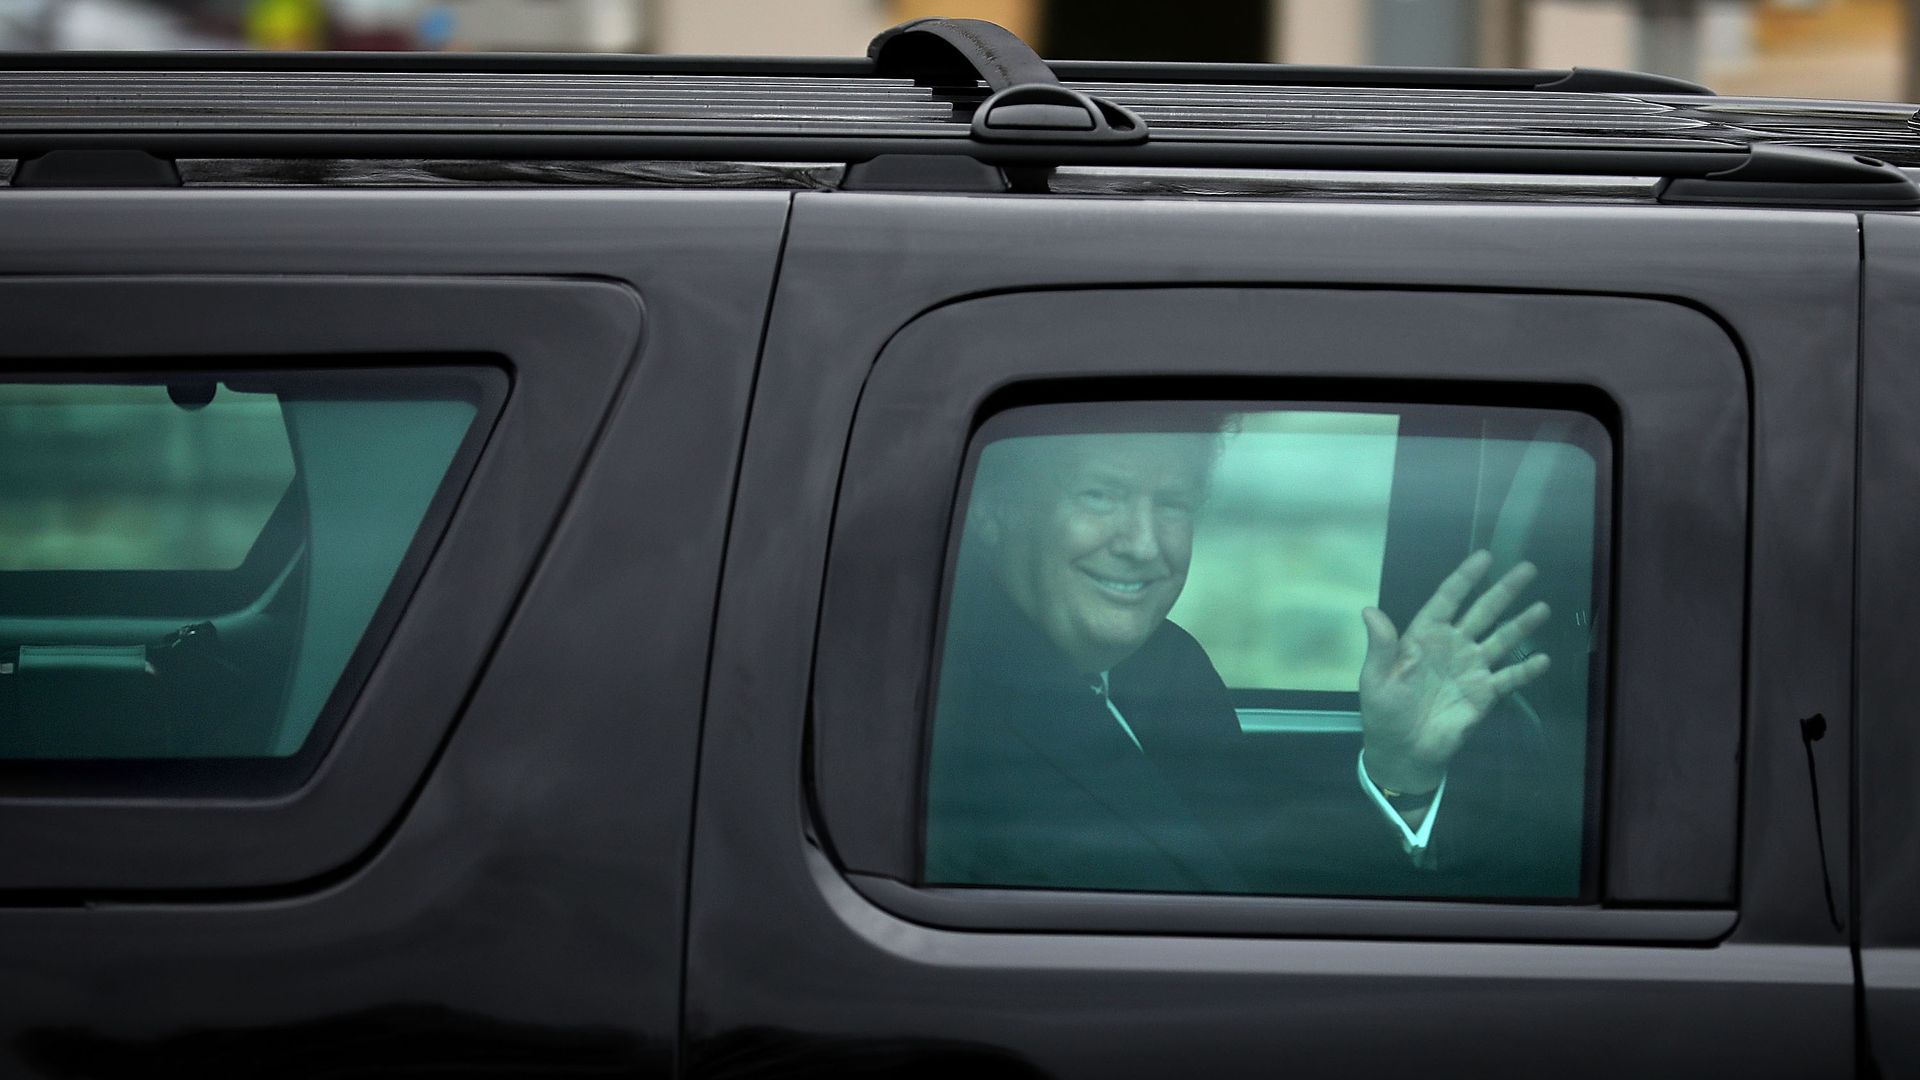 President Trump waves from inside his car